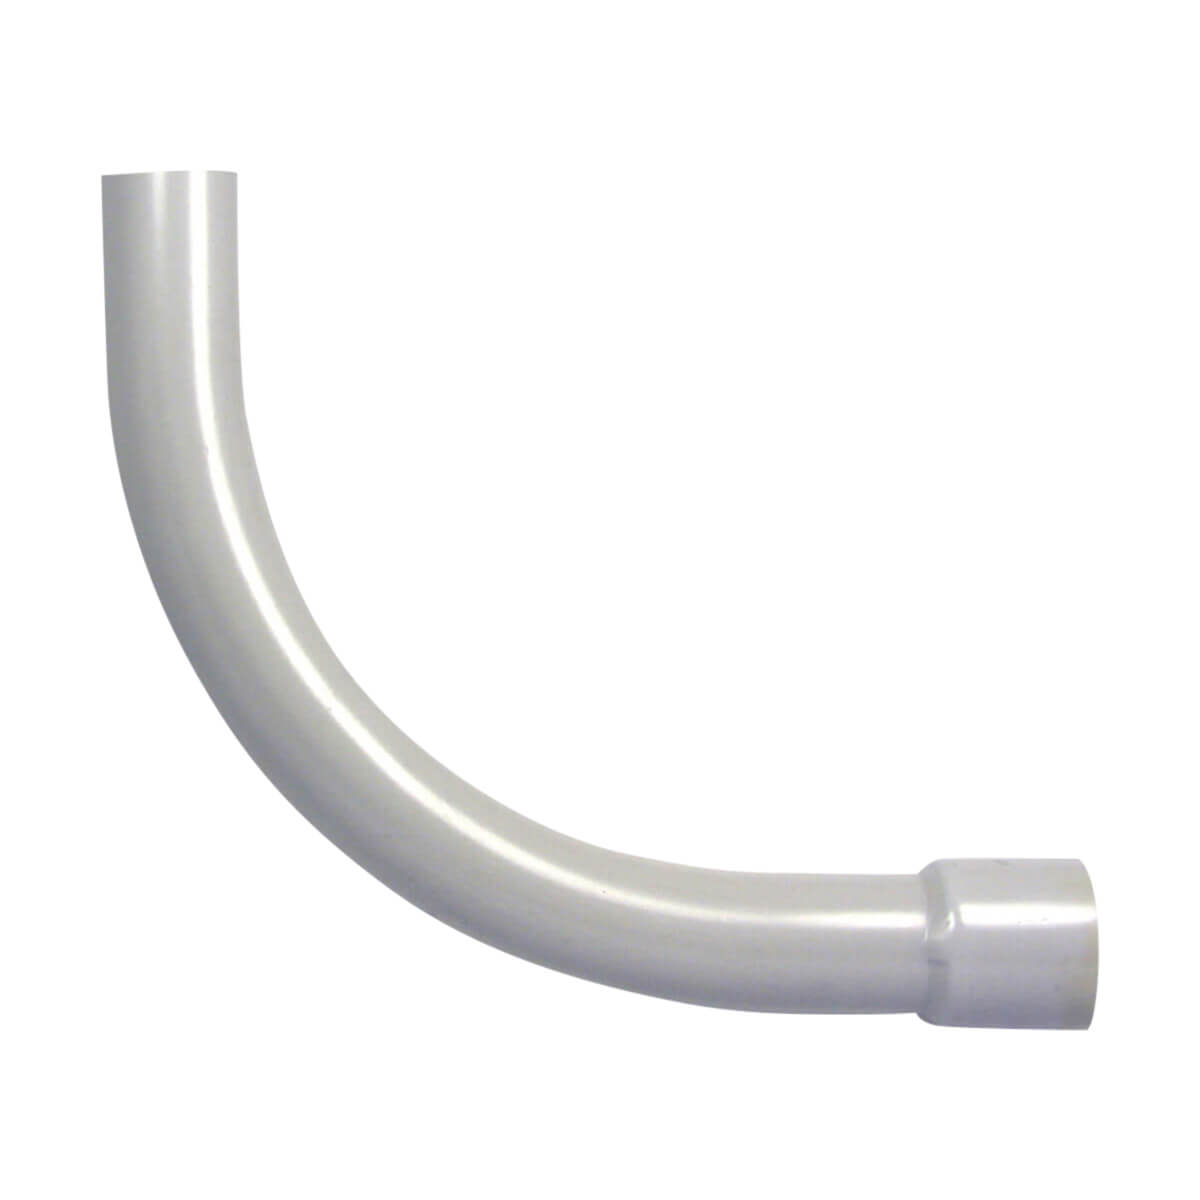 PVC Conduit 90° Elbow - Bell-end - 1-1/4-in